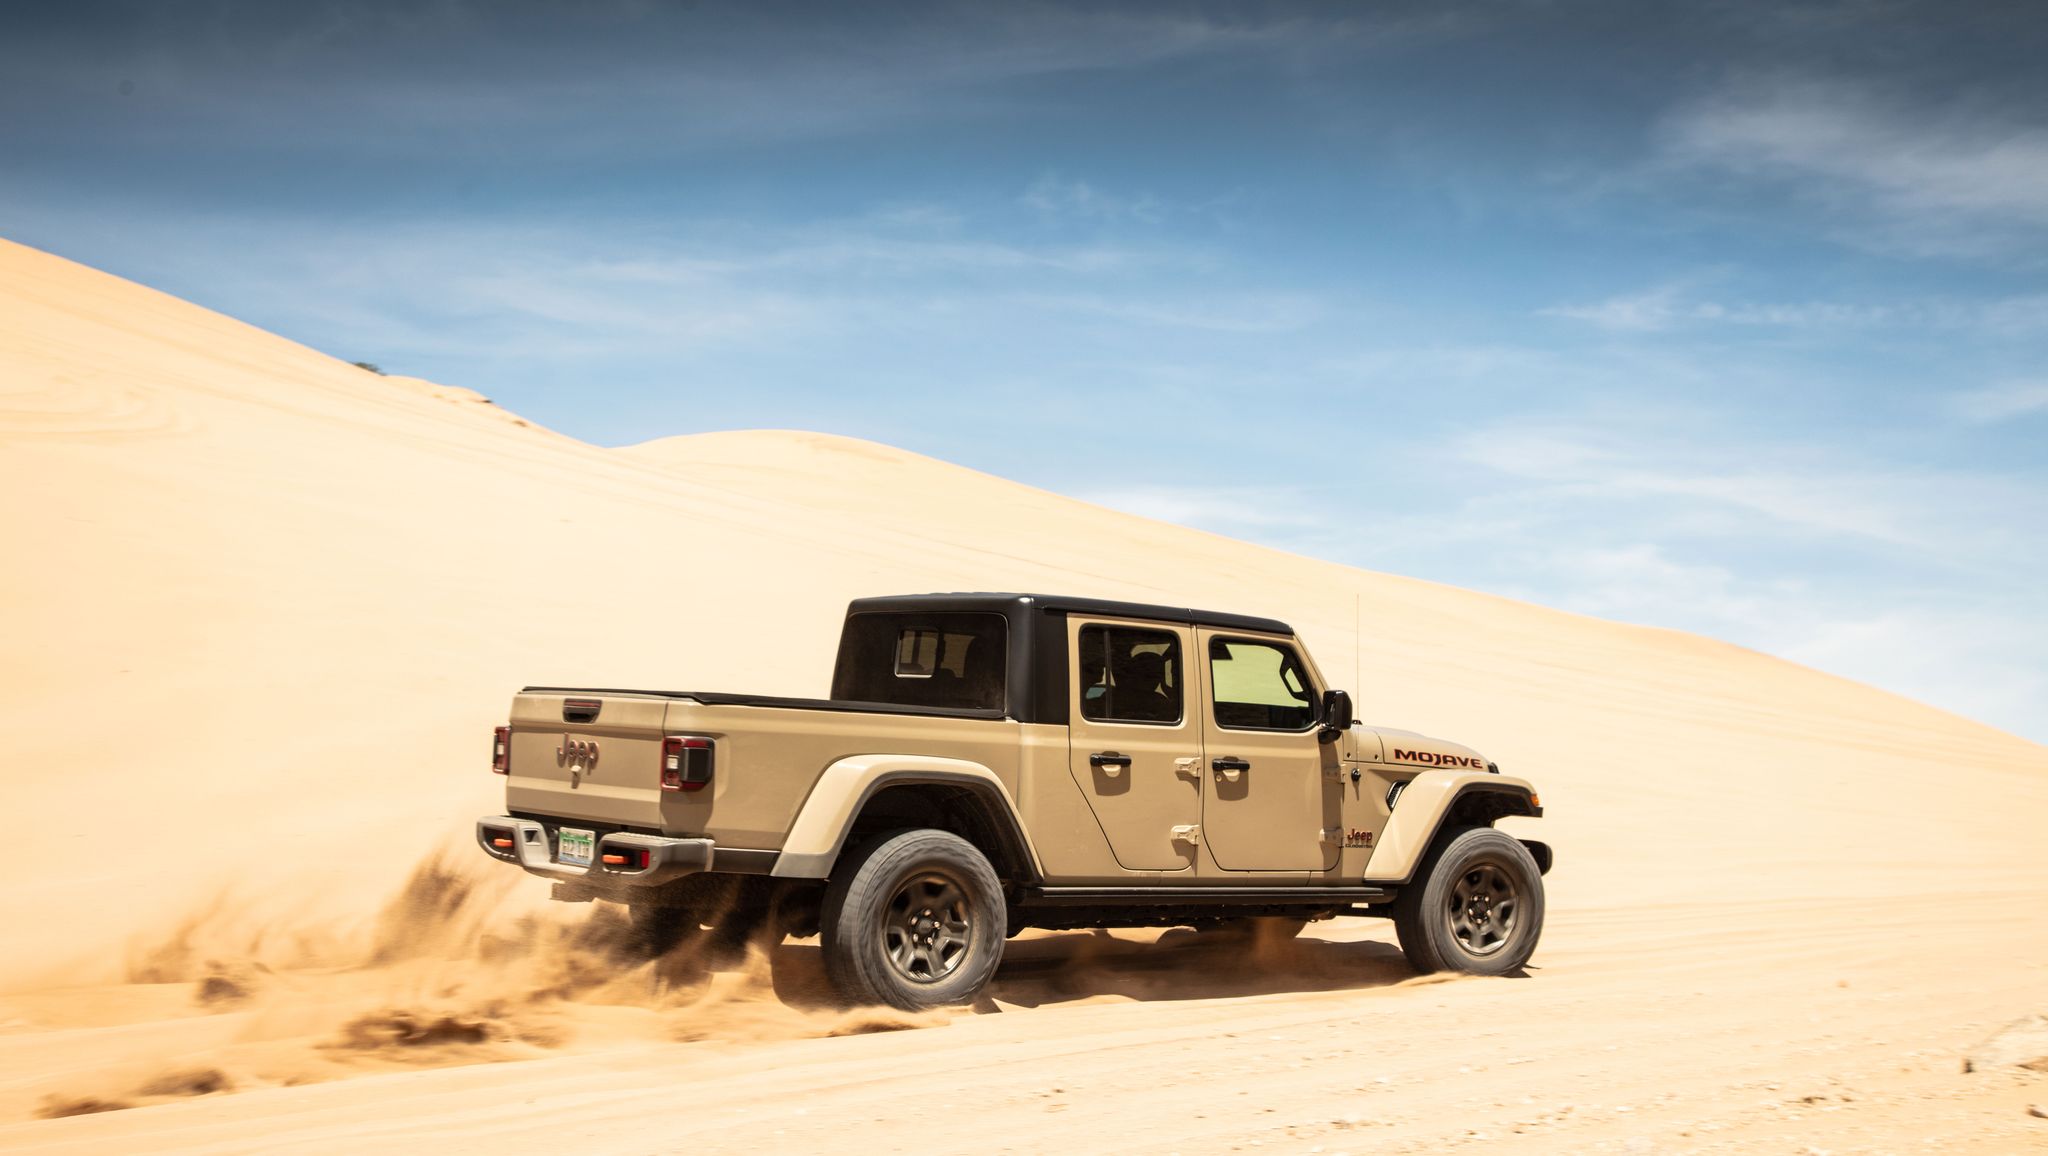 2020 jeep gladiator mojave desert test drive review in sand